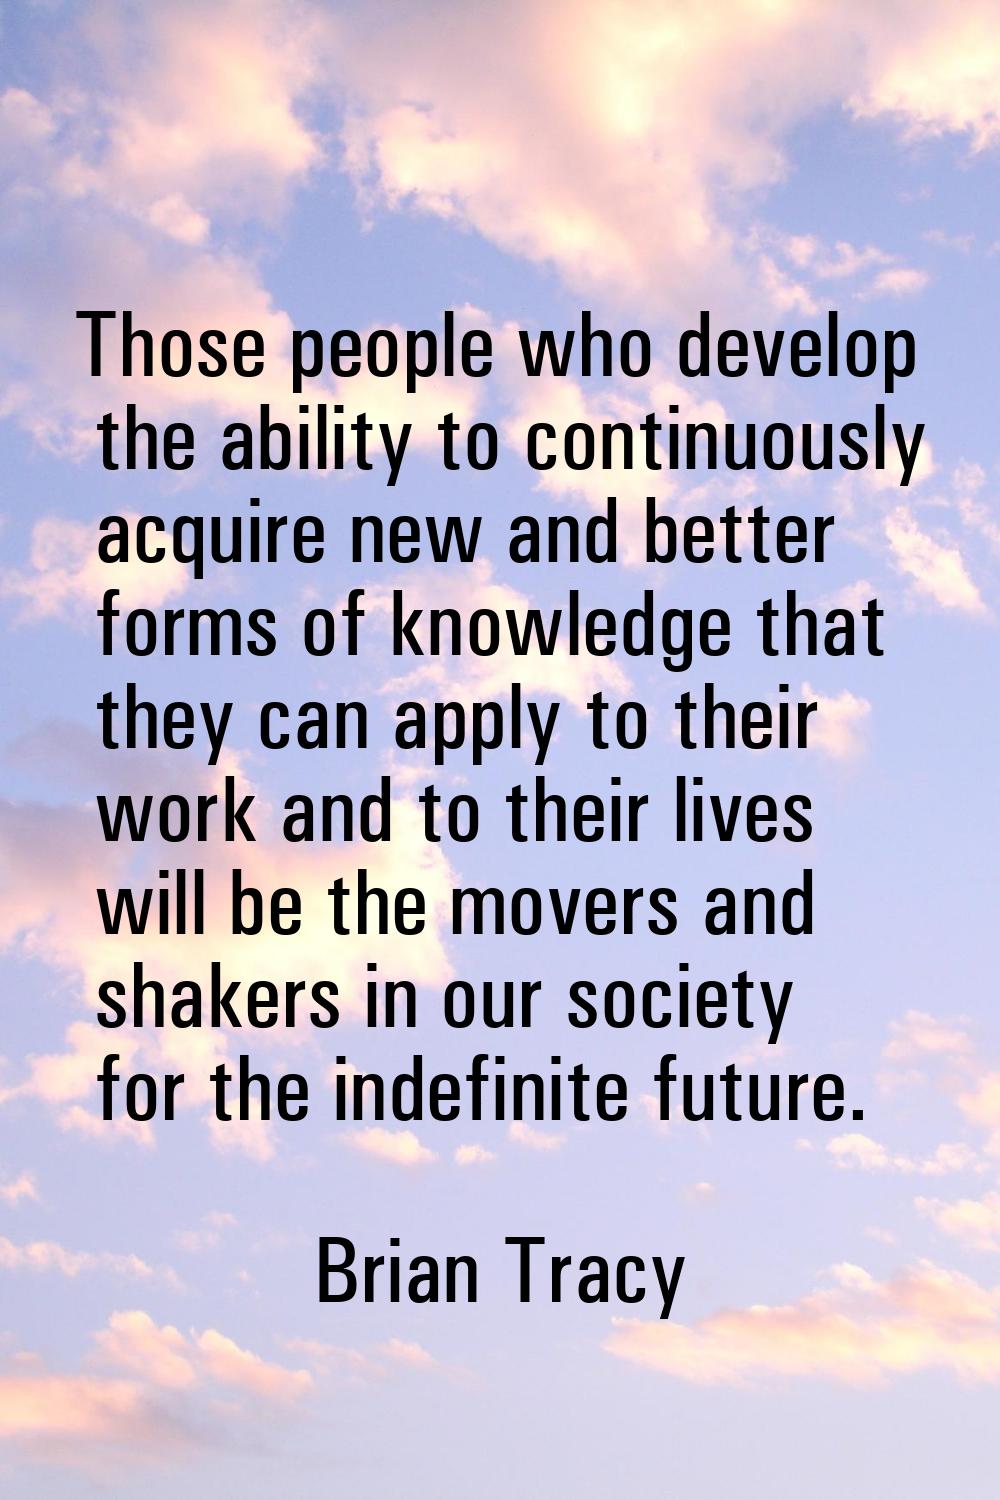 Those people who develop the ability to continuously acquire new and better forms of knowledge that